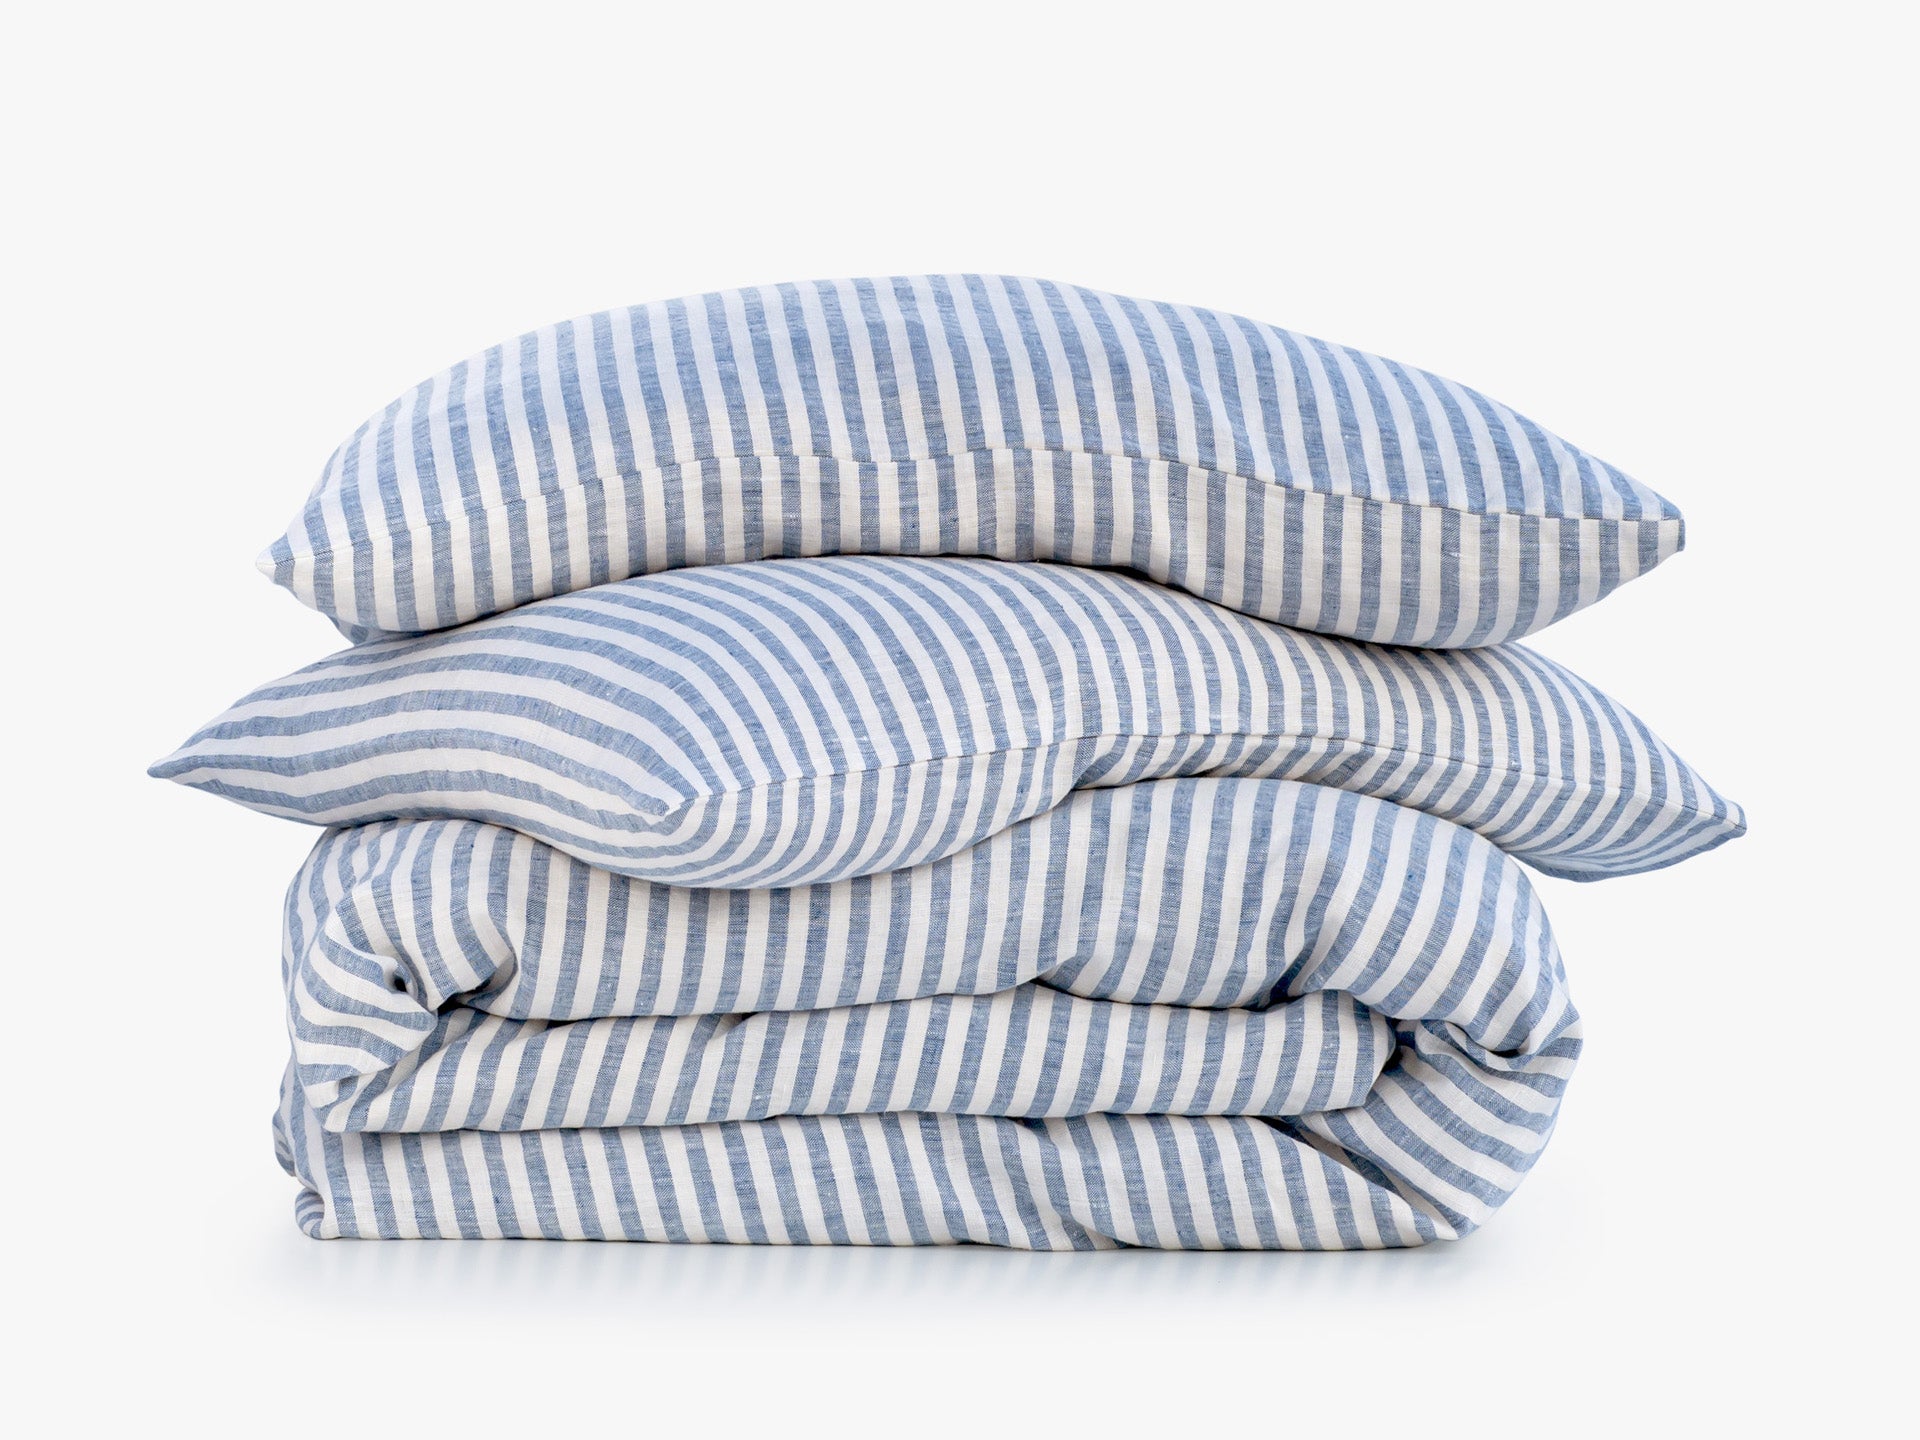 Lagodie Product Photo - Linen Bedding Set - Riviera - White and Blue Striped  Bed Sheets